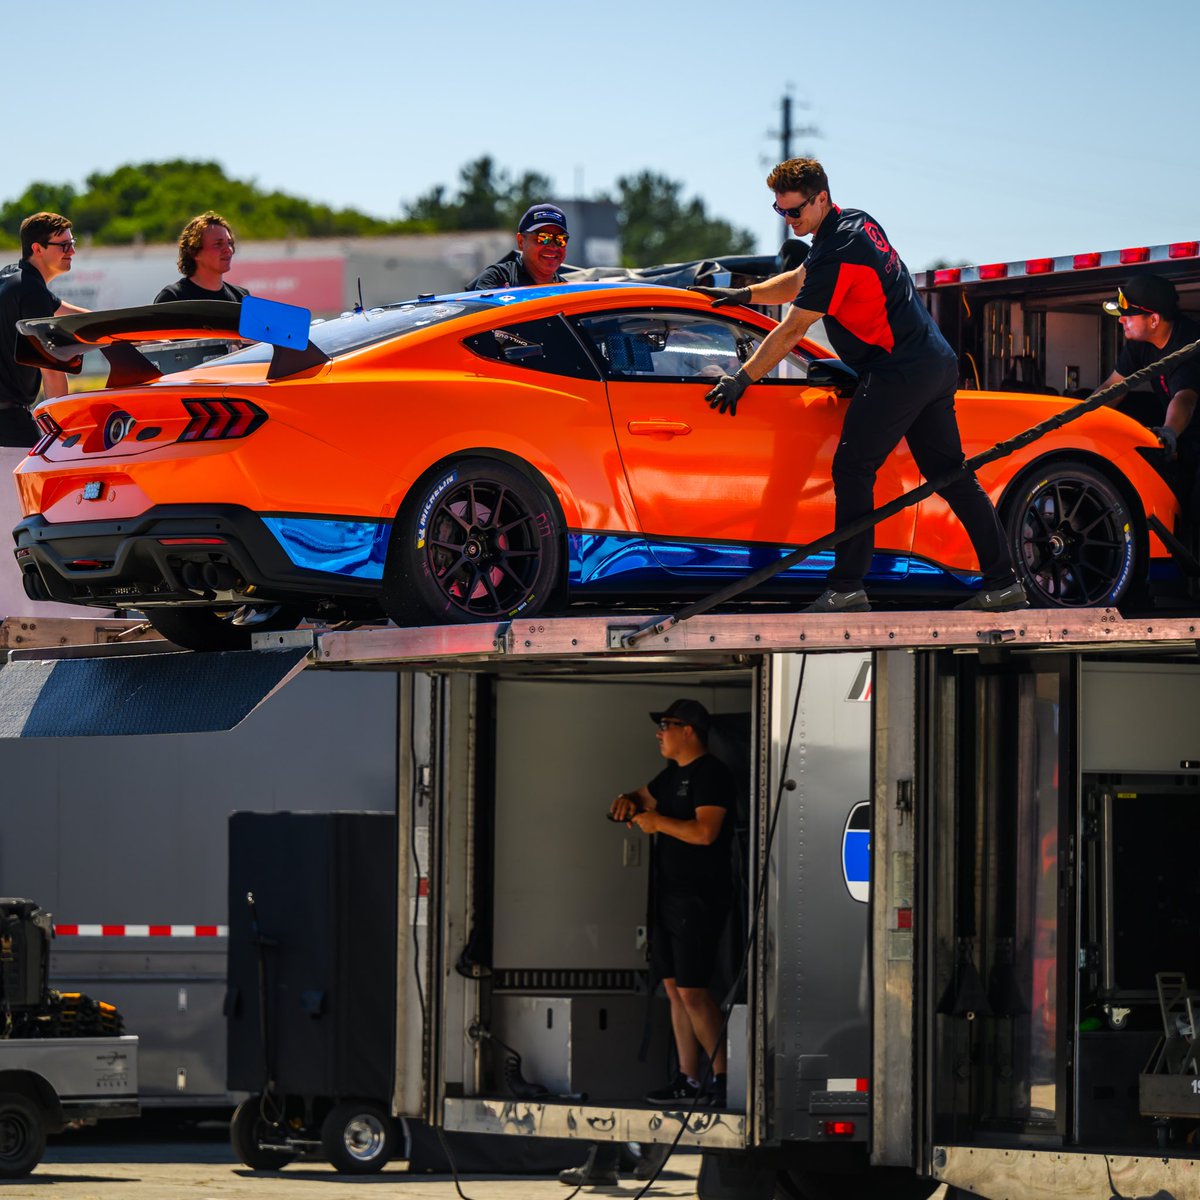 We are delighted to welcome Stephen Cameron Racing to the @FordMustang GT4 family! 🐎 California natives Sean Quinlan and Gregory Liefooghe will take the reigns during @IMSA Michelin Pilot Challenge this weekend at @WeatherTechRcwy! #BredtoRaceFP